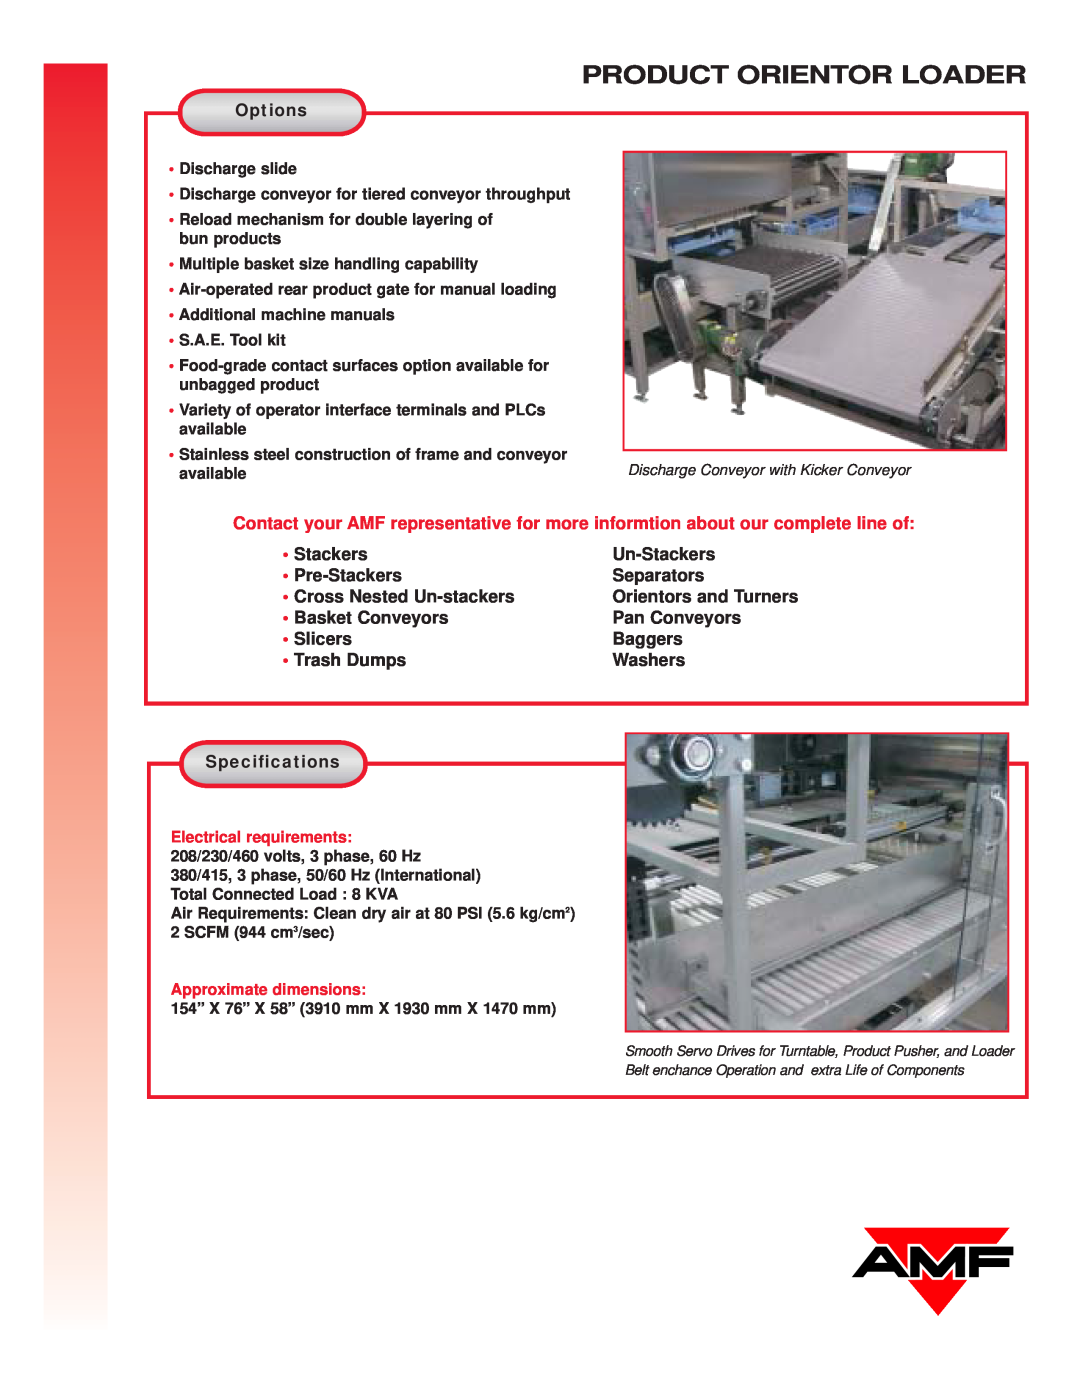 AMF Bread And Bun Products Orientor Loader manual Product Orientor Loader 